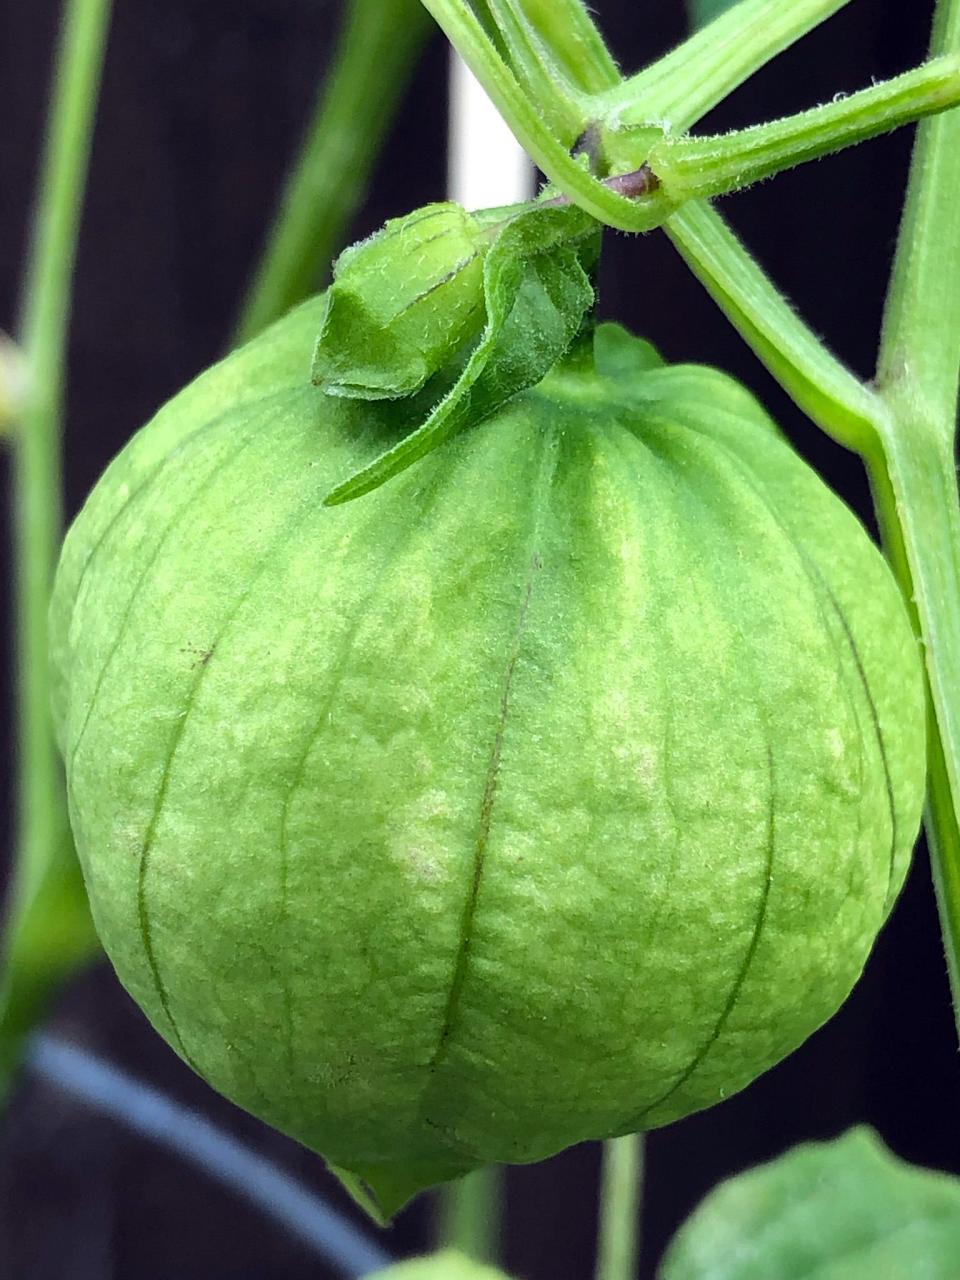 A papery husk forms around the tomatillo on the plant.